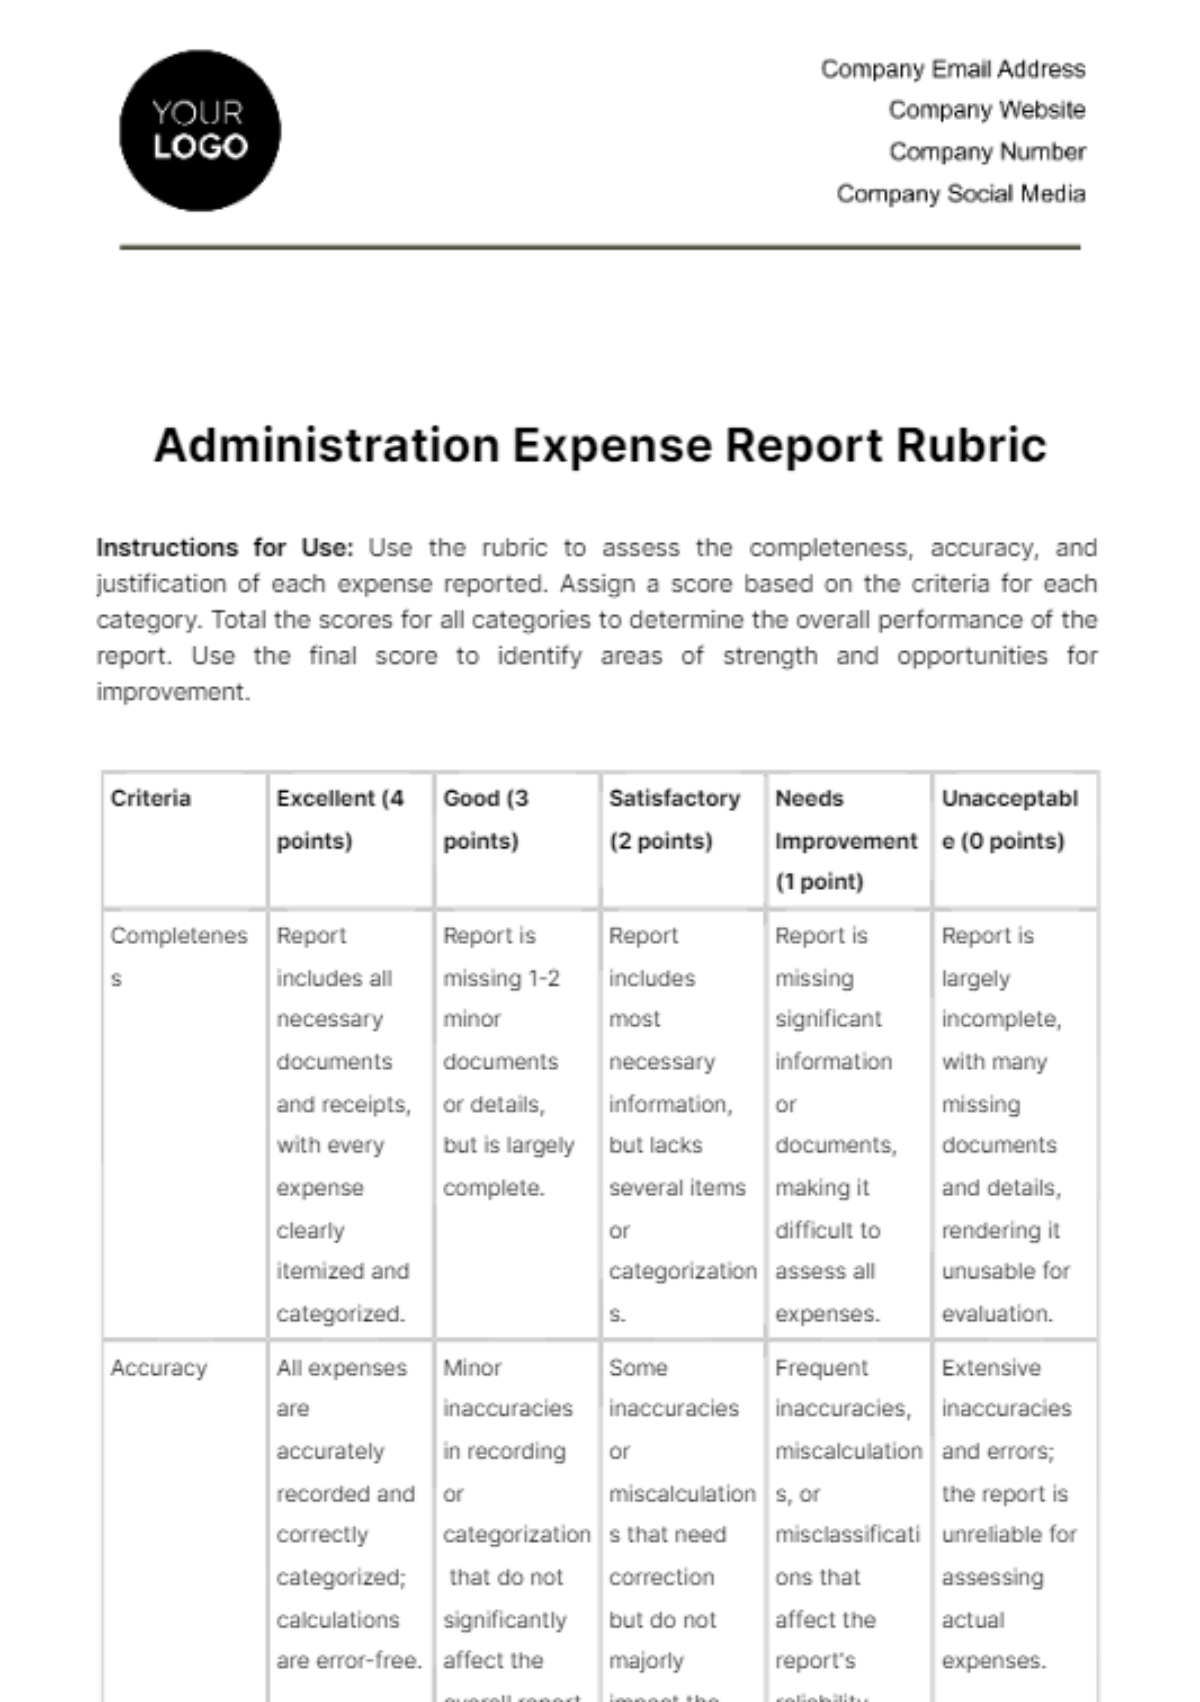 Free Administration Expense Report Rubric Template